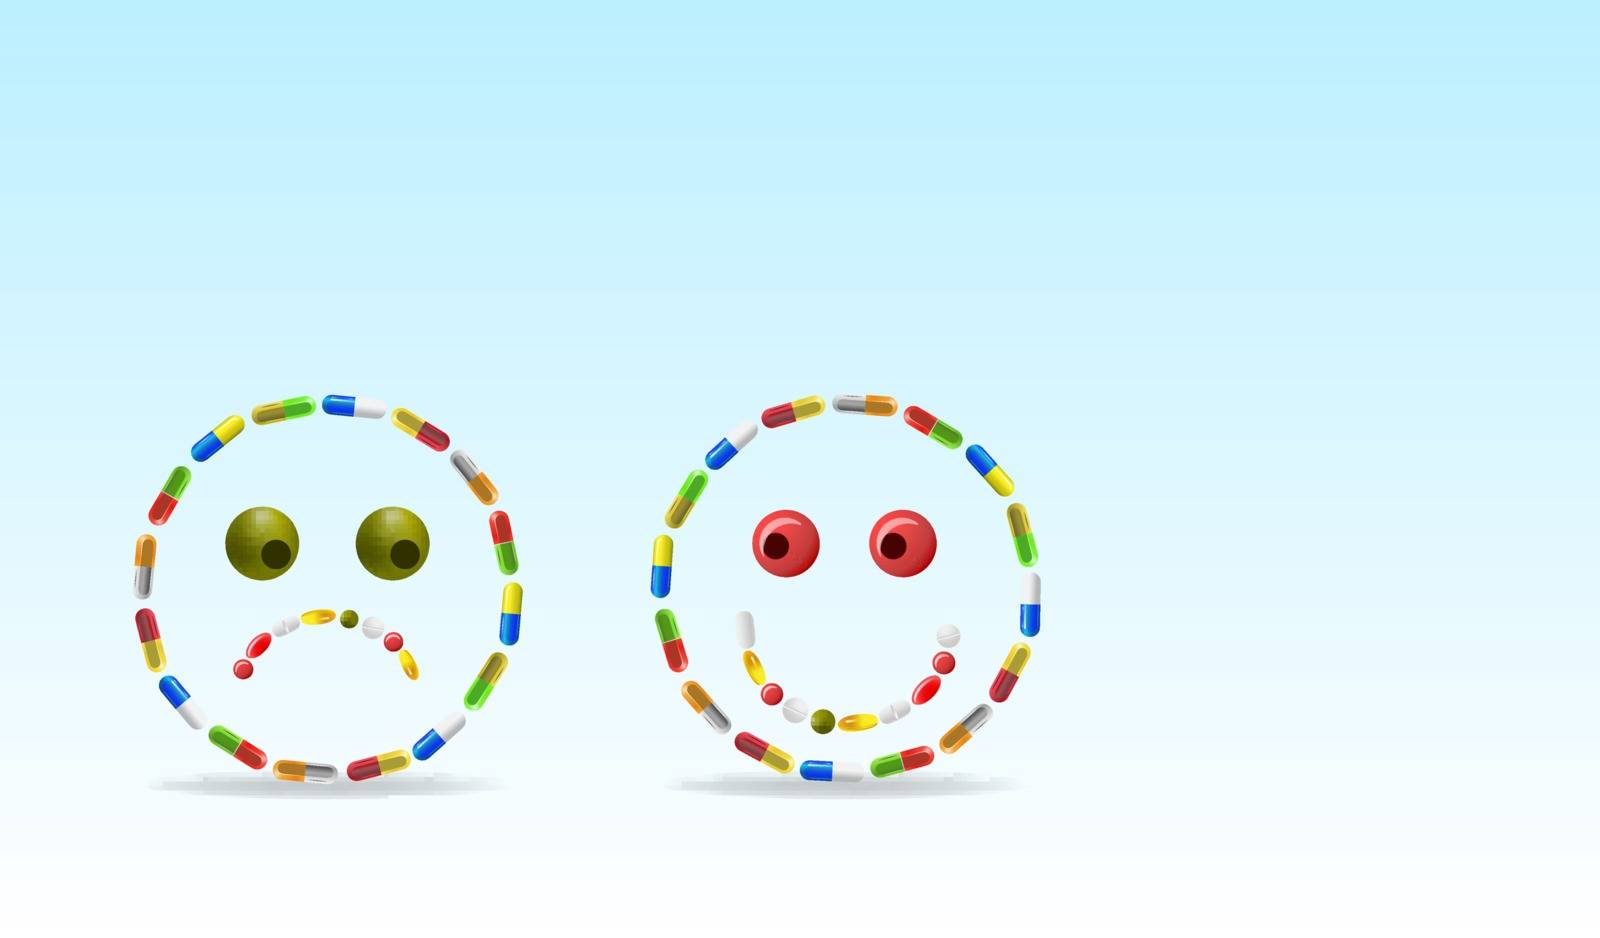 Vector Sad and Happy Face Made of Pills, Eps10 Vector, Gradient Mesh and Transparency Used